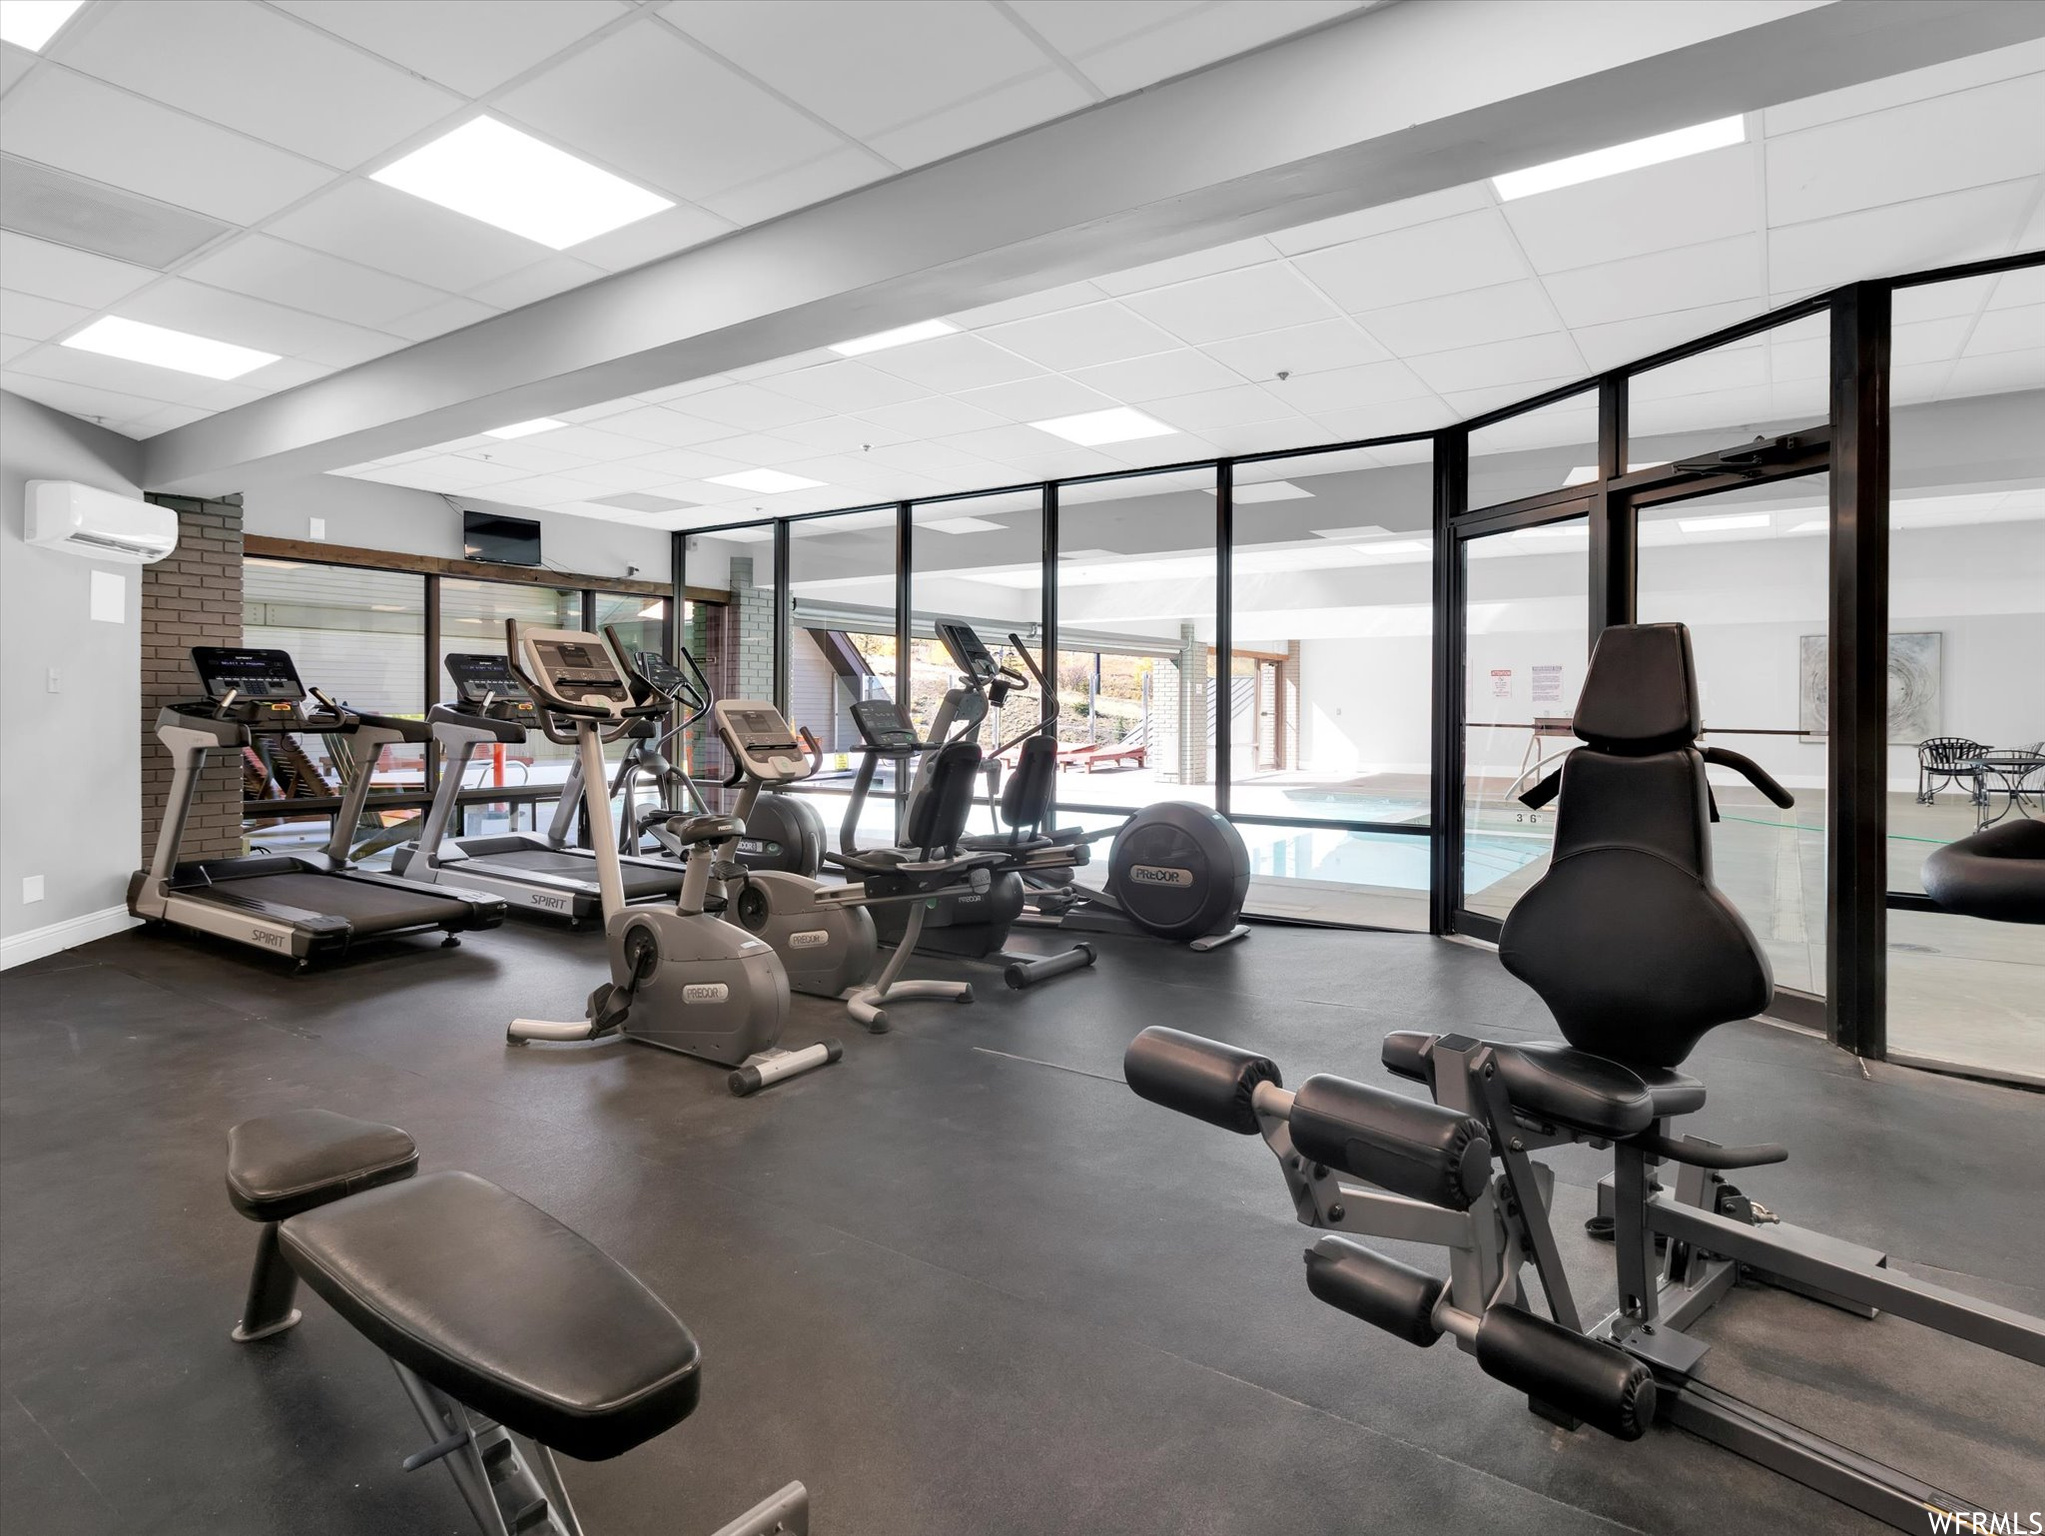 Gym with expansive windows, a wall mounted air conditioner, and a paneled ceiling